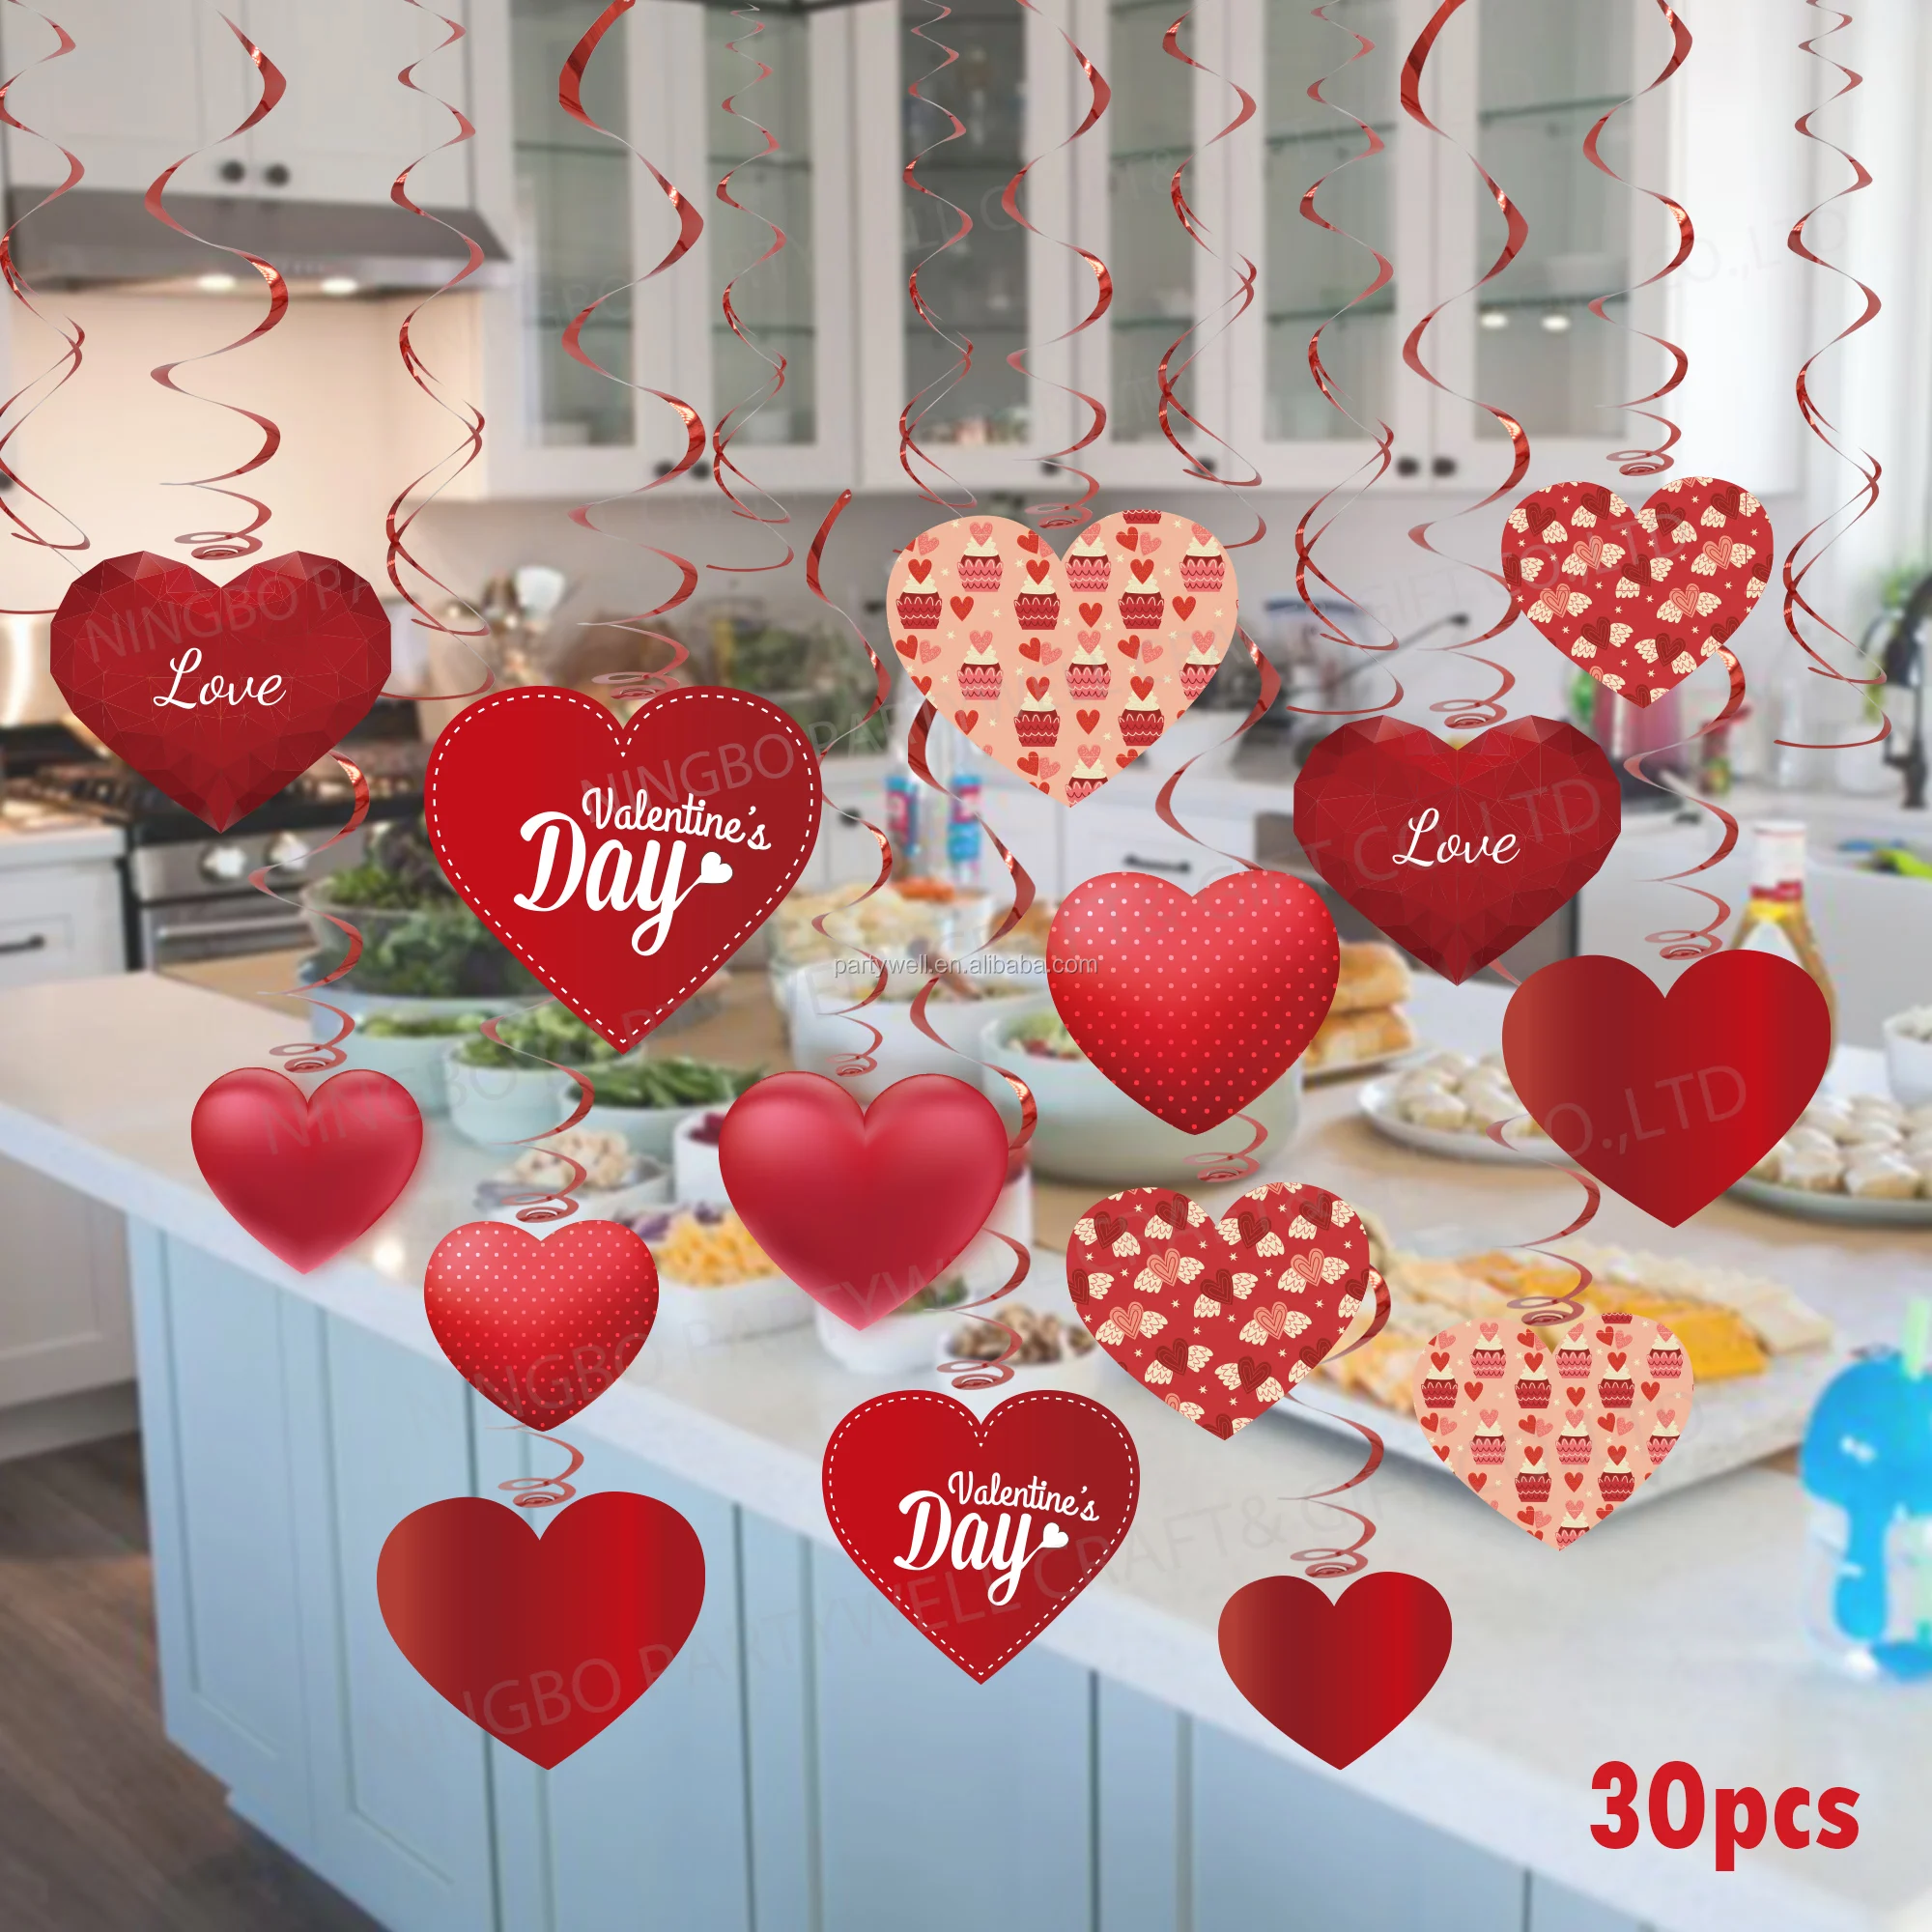 30 pcs MGparty Hanging Heart Swirls Party Decorations Hanging Foil Swirl Valentines Day Decorations for Ceiling and Windows 30 pcs InnoWis Hanging Foil Swirl Valentine's Day Decorations for Ceiling and Windows 